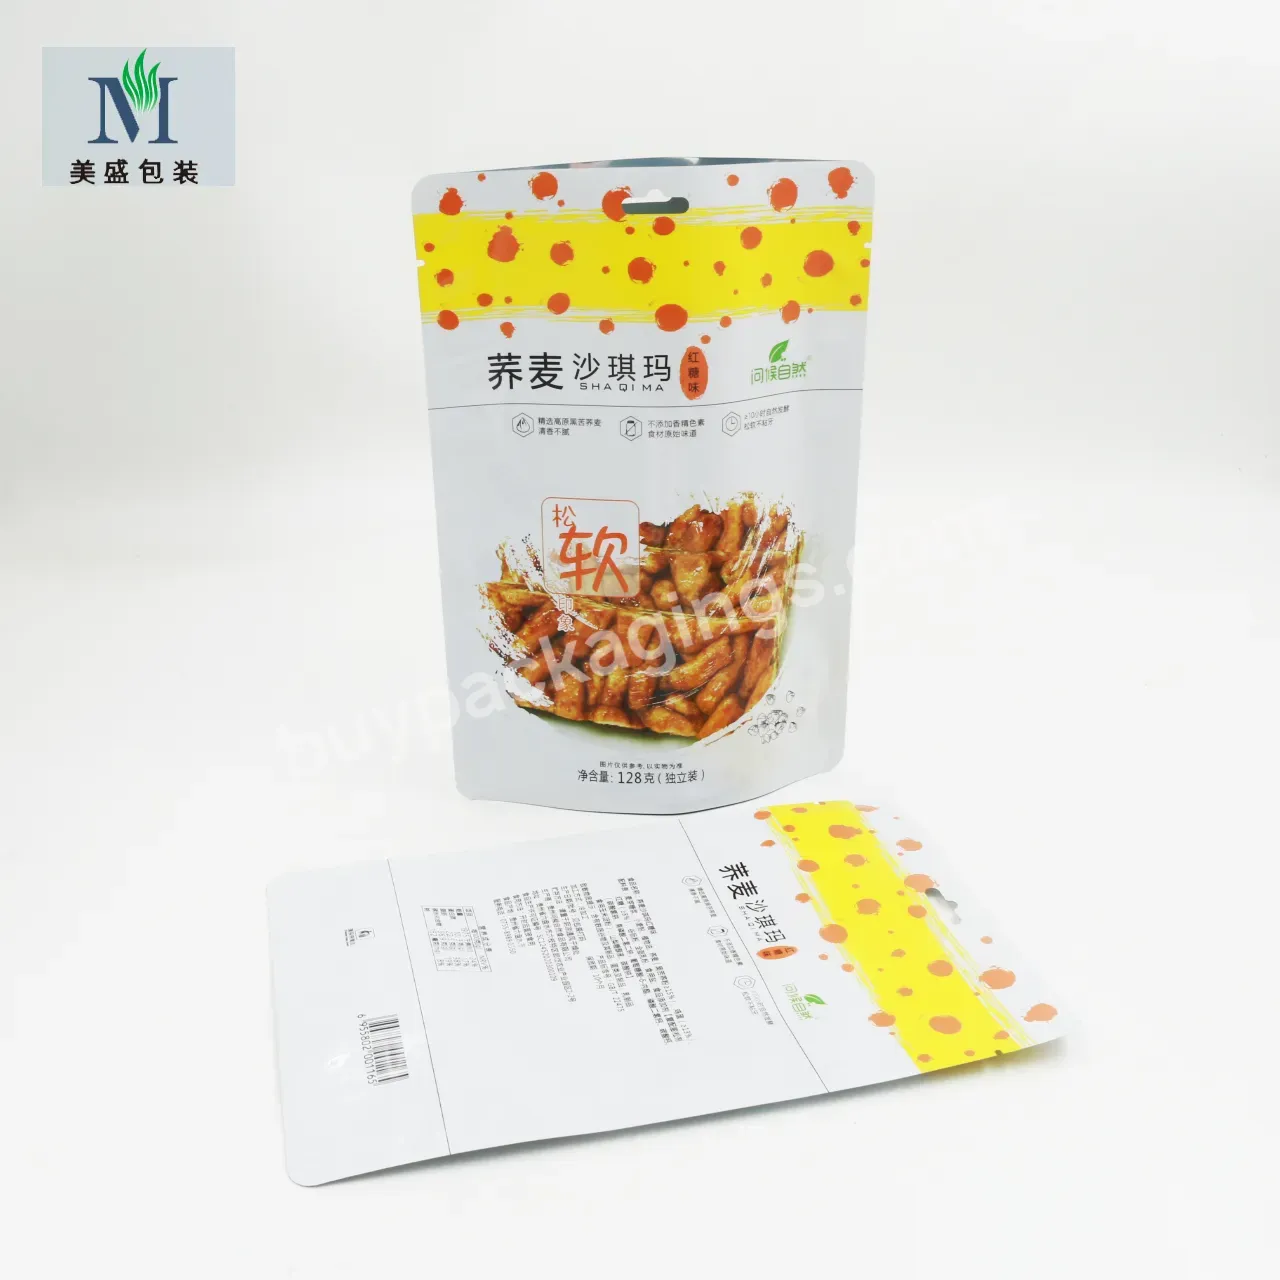 Snack Food Plastic Packaging Edibles Bags Stand Up Ziplock Bags Custom Printed Logo Eco Friendly Packaging With Tear Notch